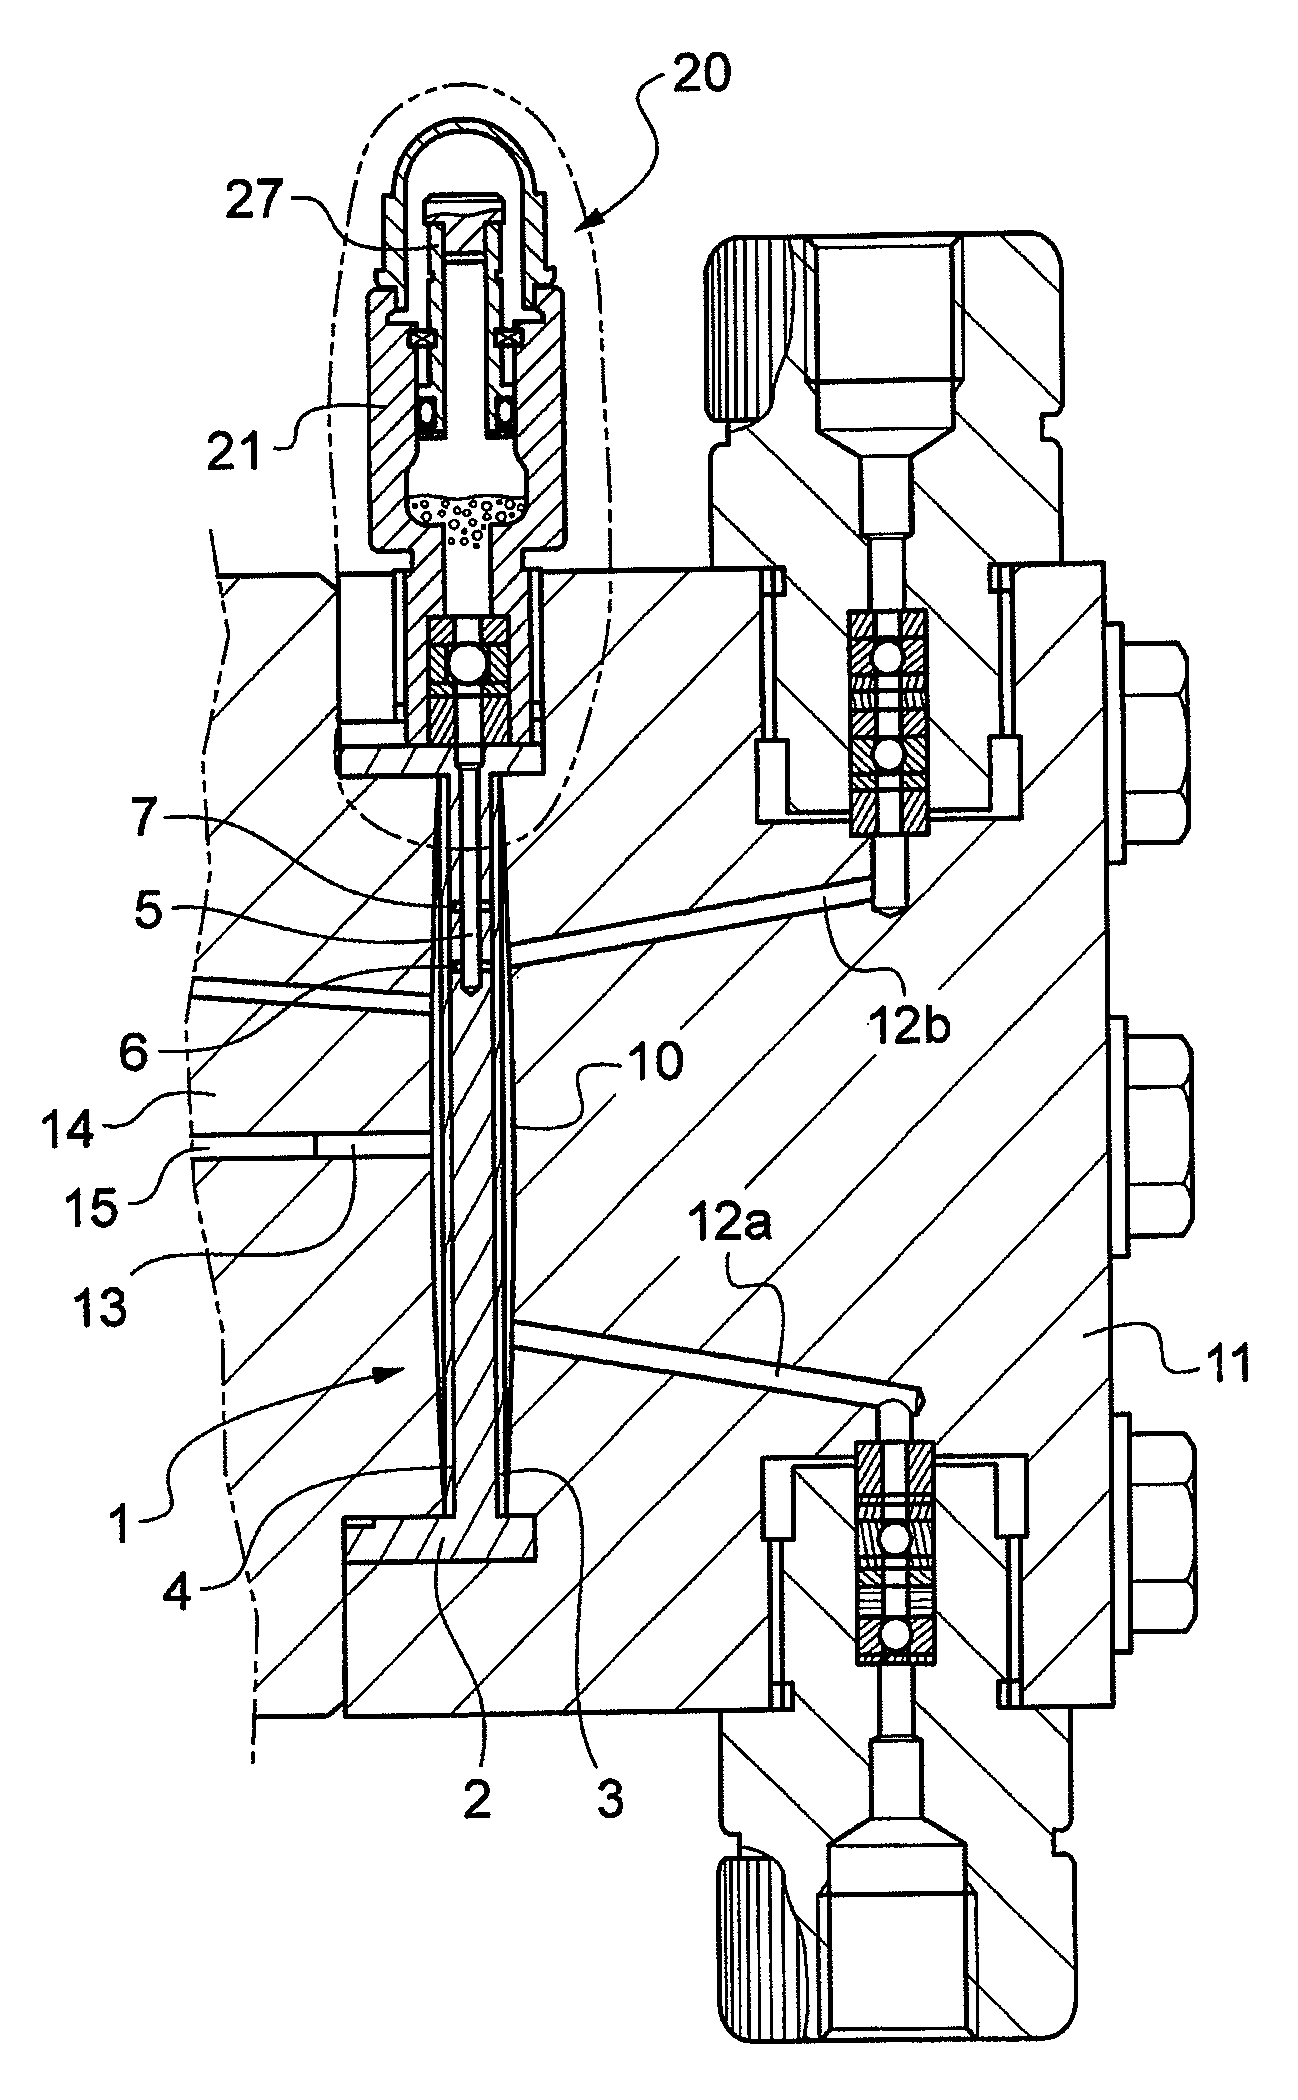 Device for detecting breakage of a diaphragm in a hydraulically-actuated pump, a method of mounting such a device on a pump, and a pump fitted with such a device